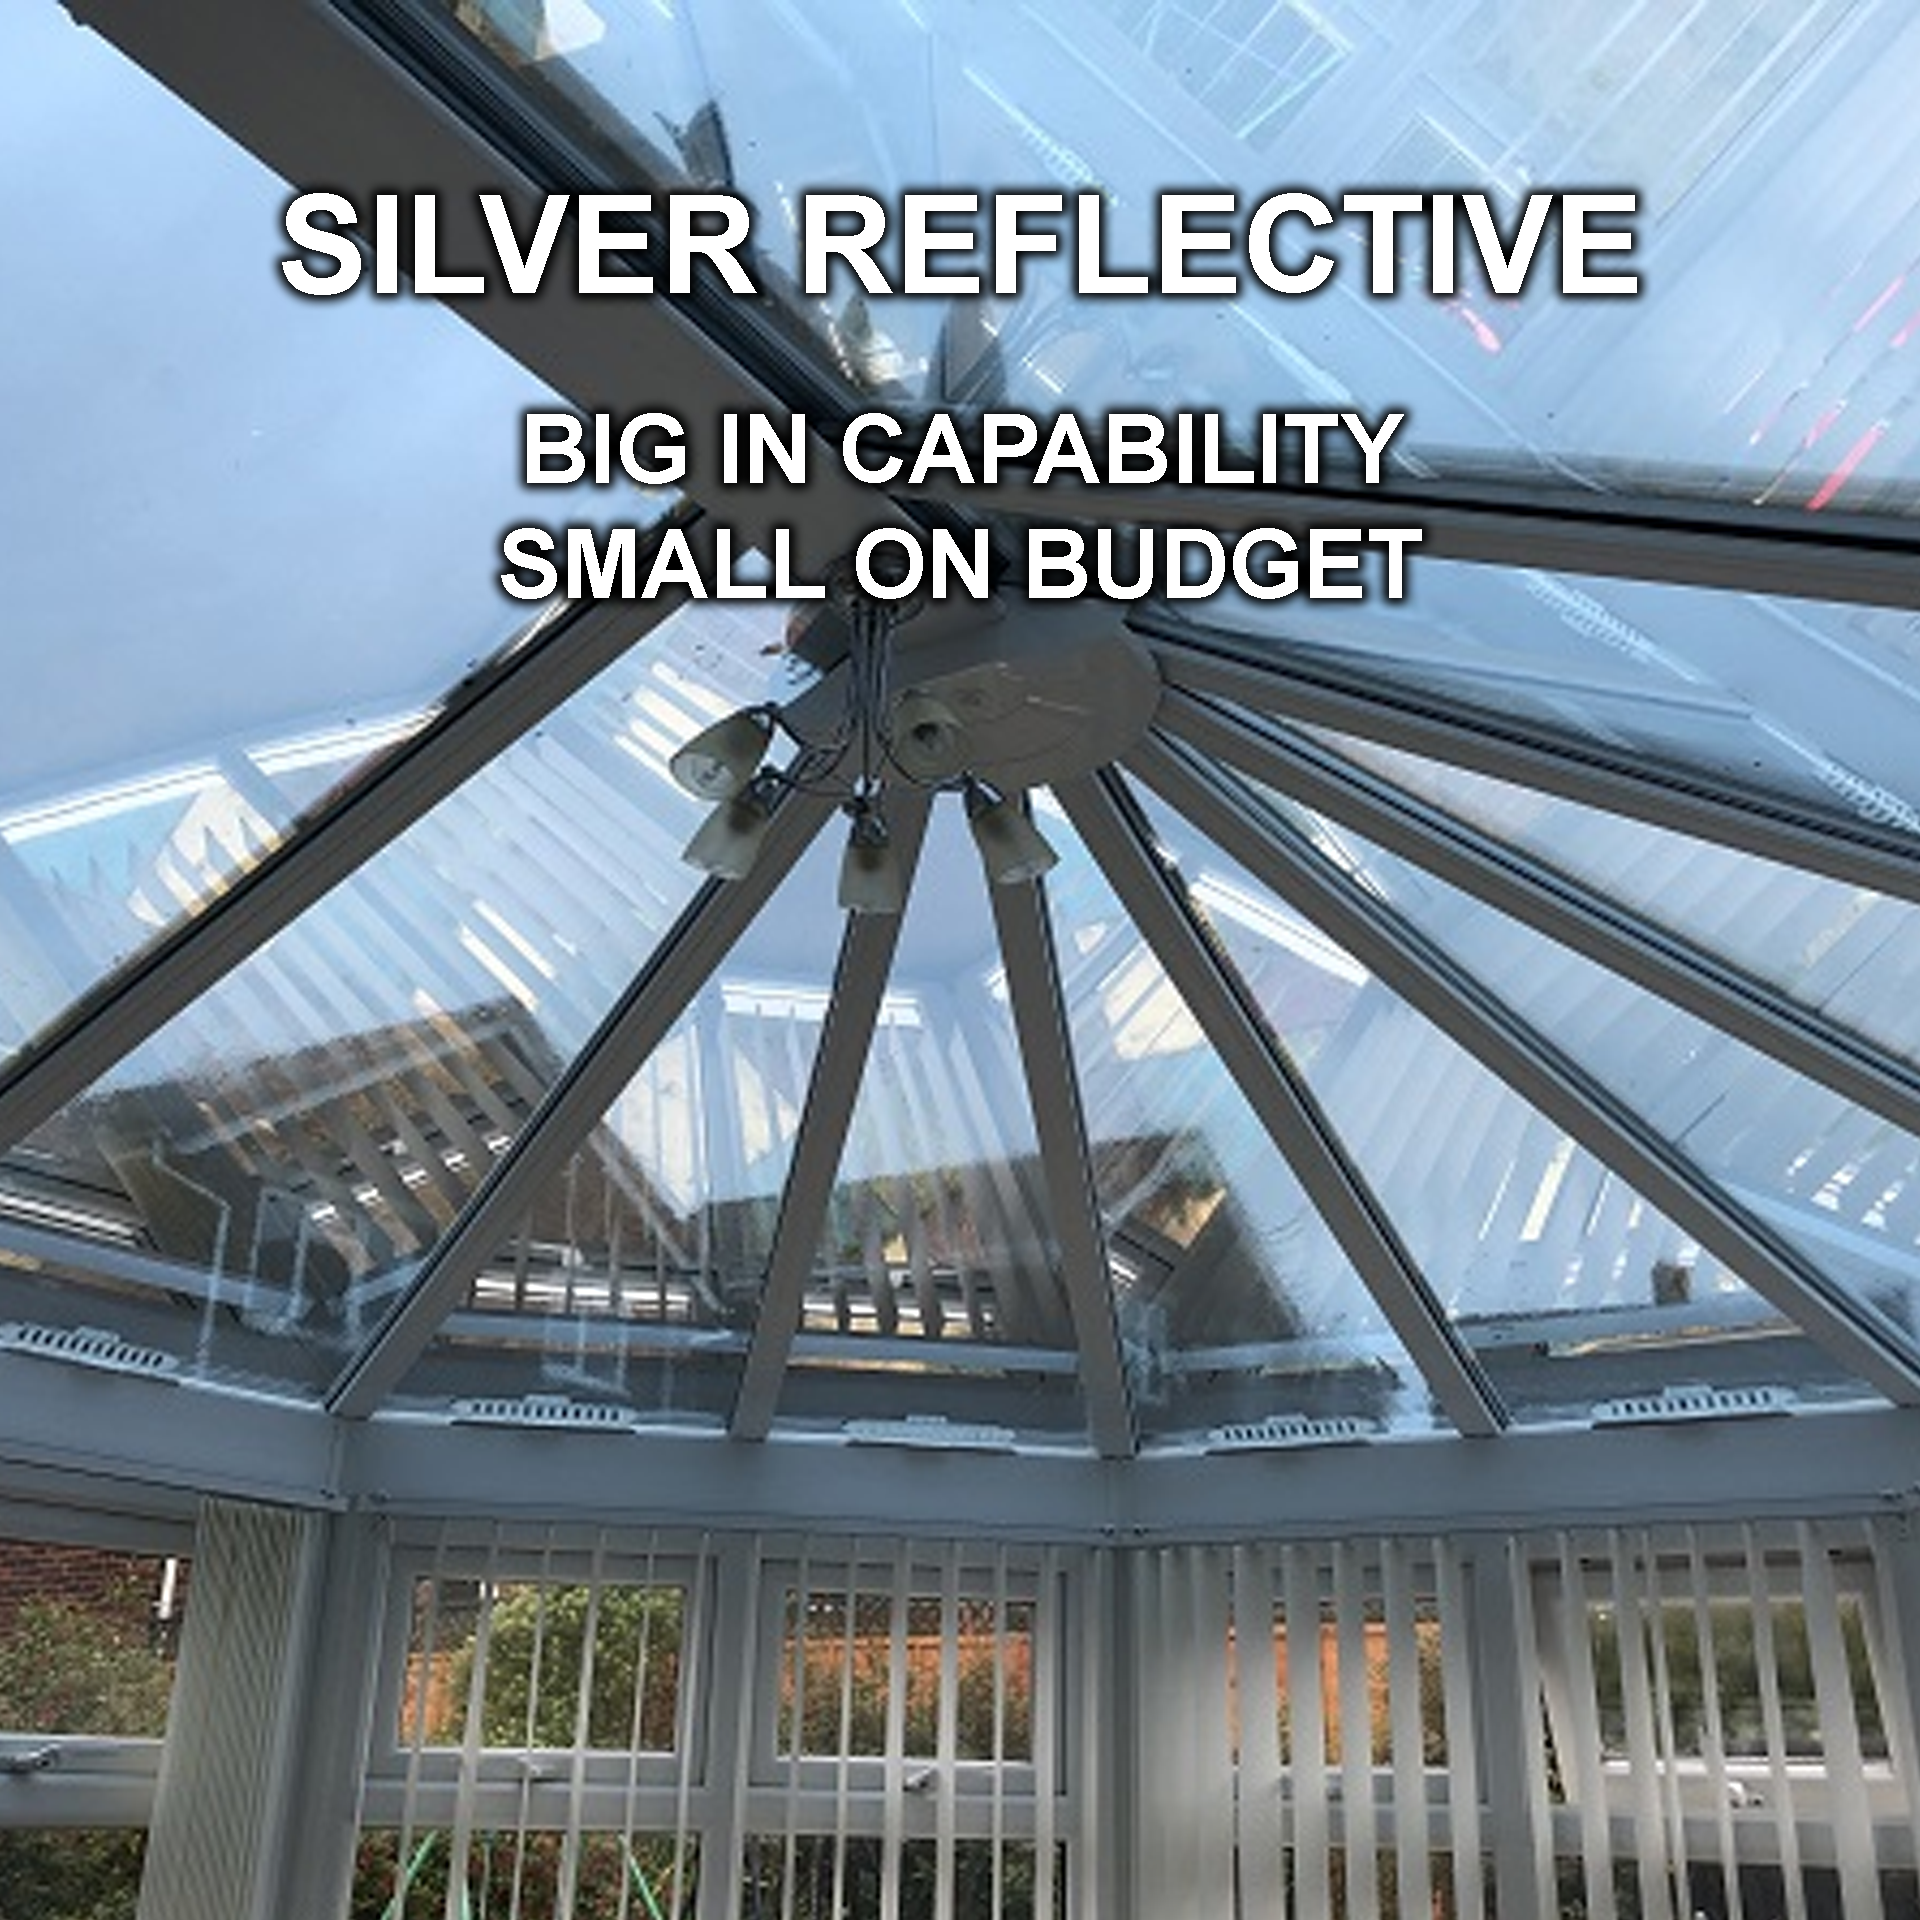 PRO WINDOW TINTING FILM 152cm x 10m EXTERNAL PLASTIC REFLECTIVE SILVER 20 CONSERVATORY ROOF FROM £11.99 